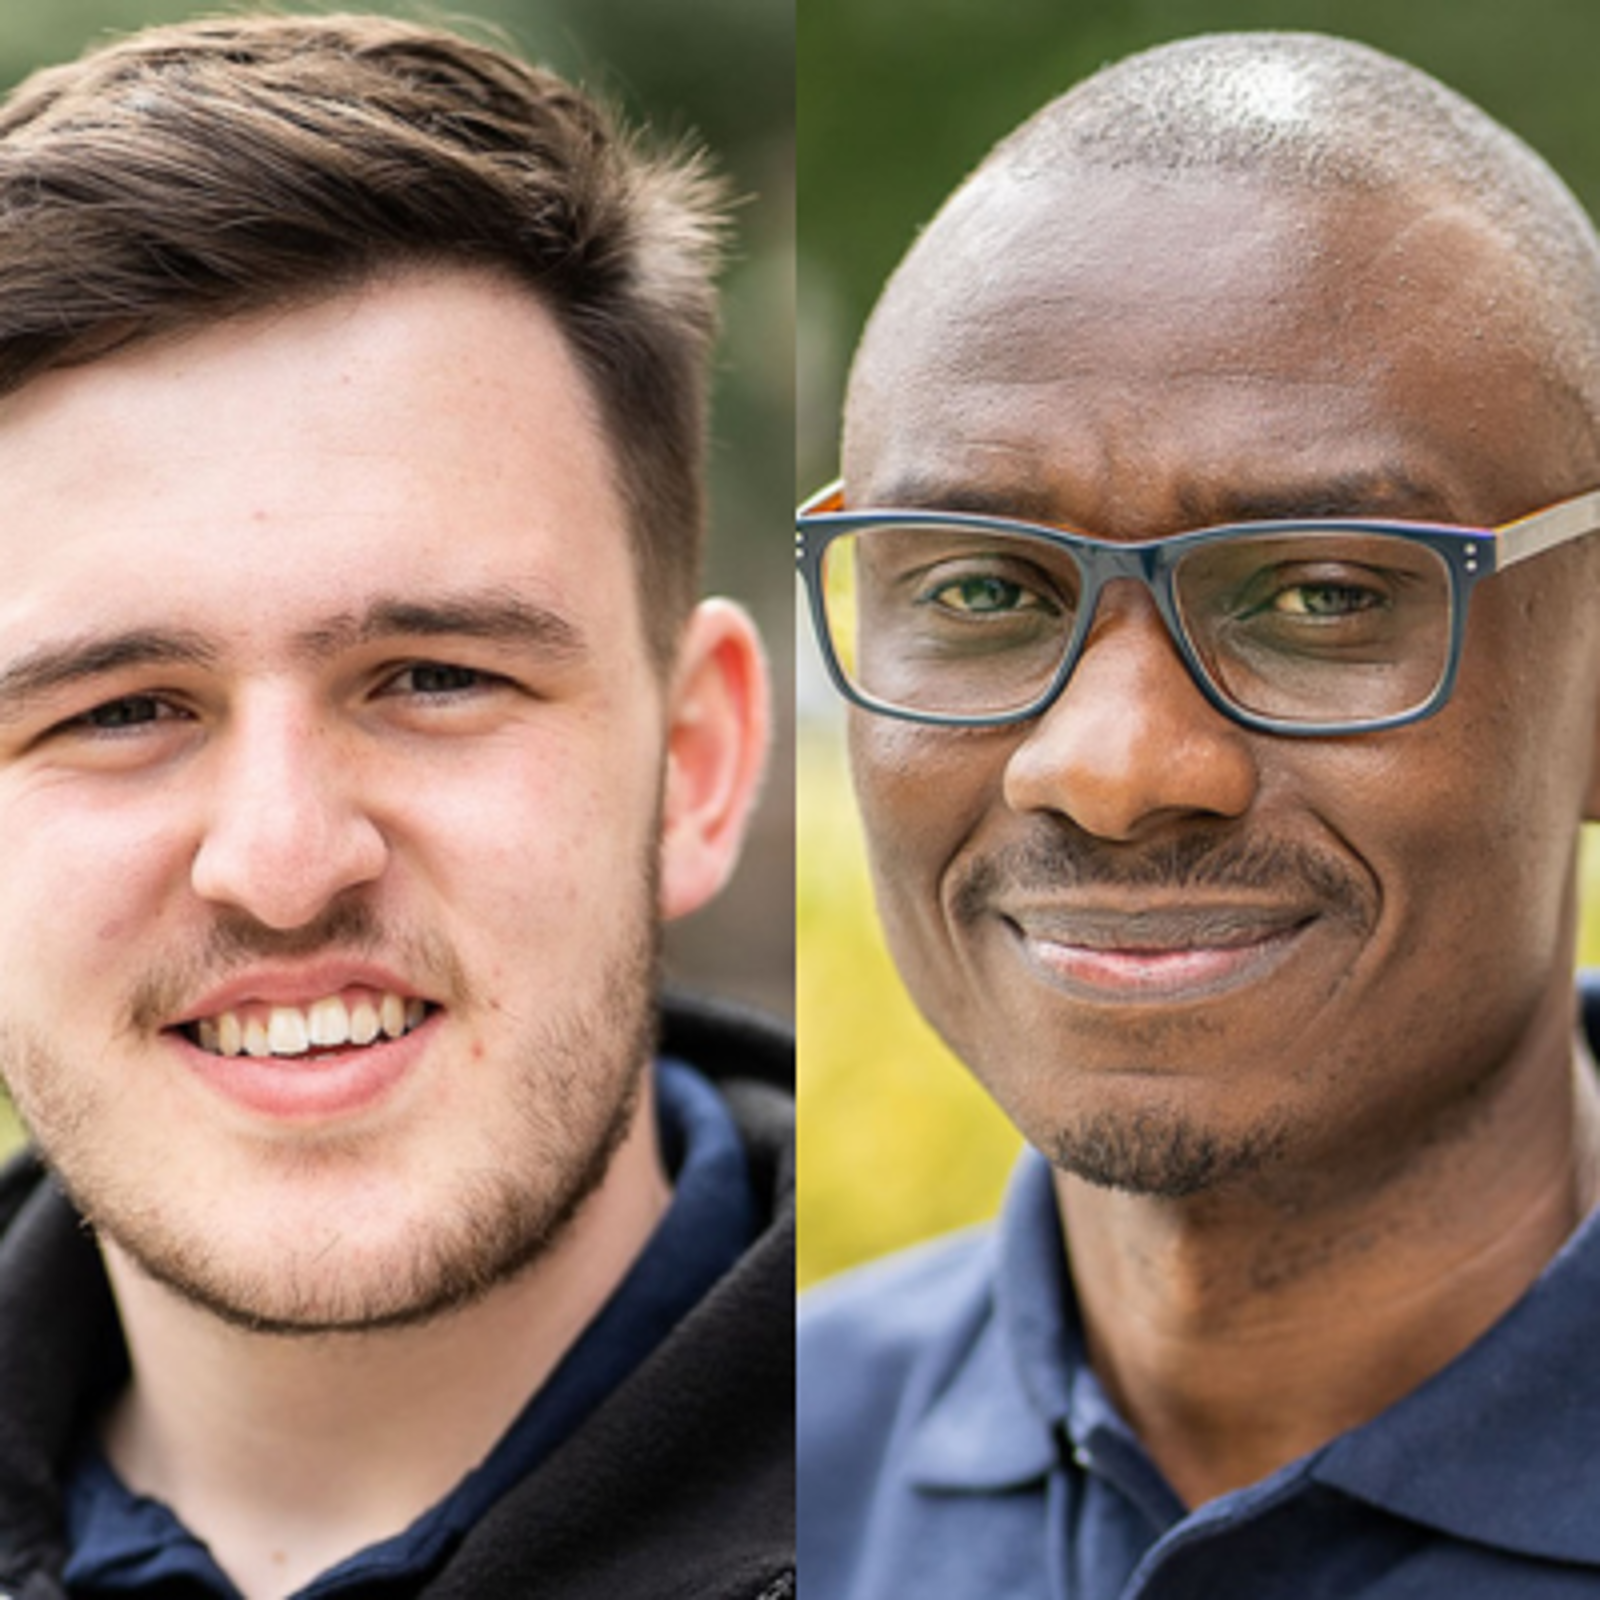 Jack Farren and Joseph Lukwago, Rural Inclusion Co-Founders